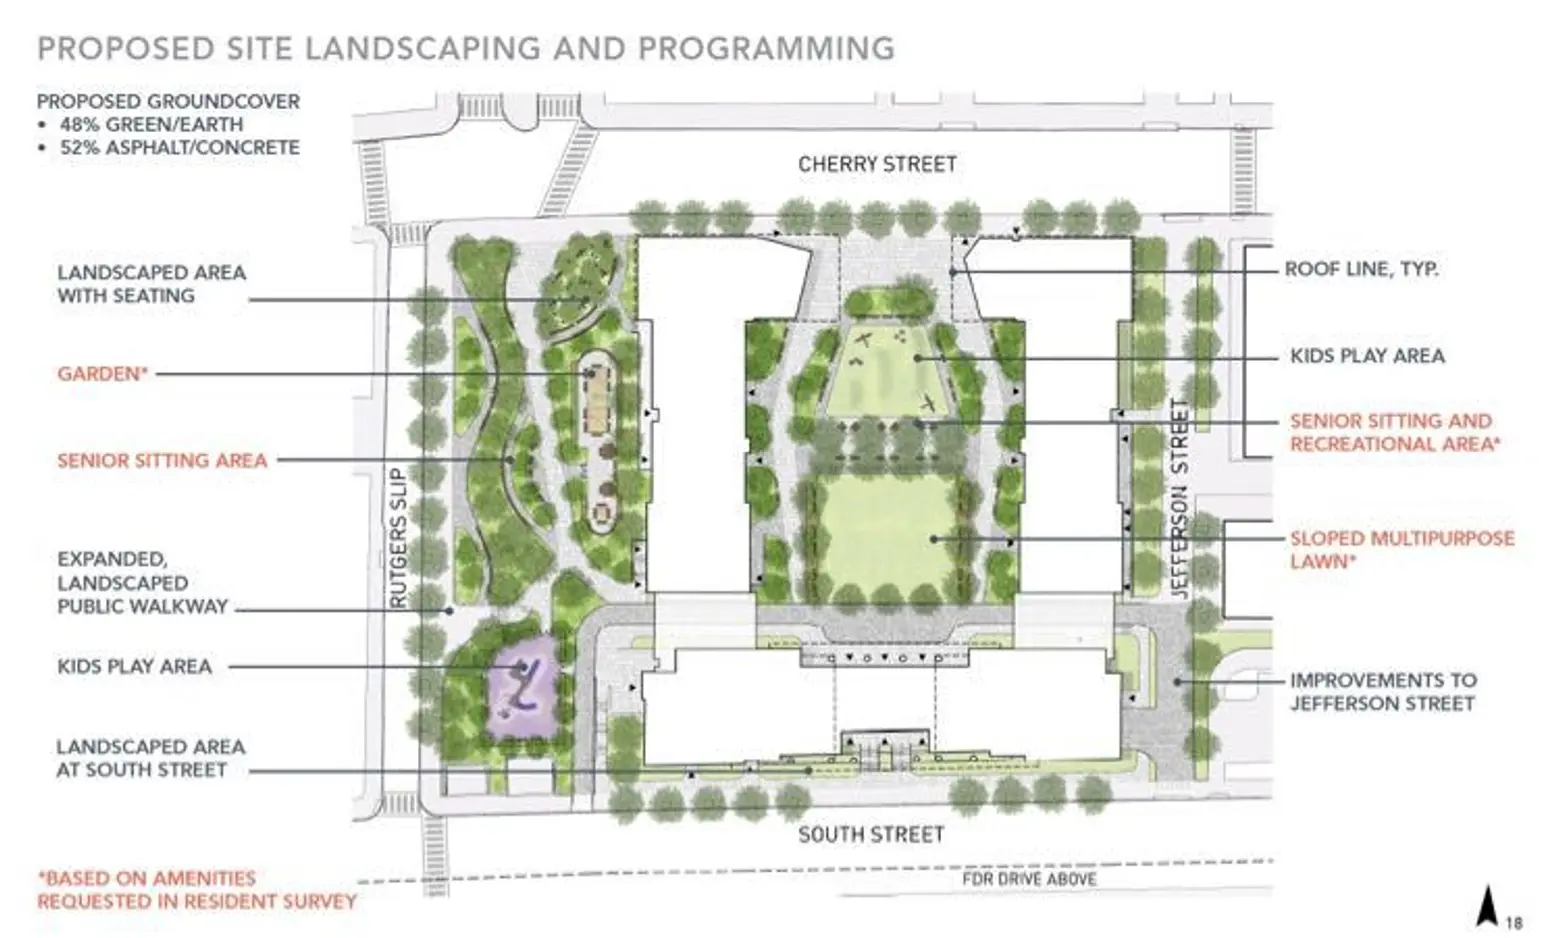 260 south street proposed landscaping